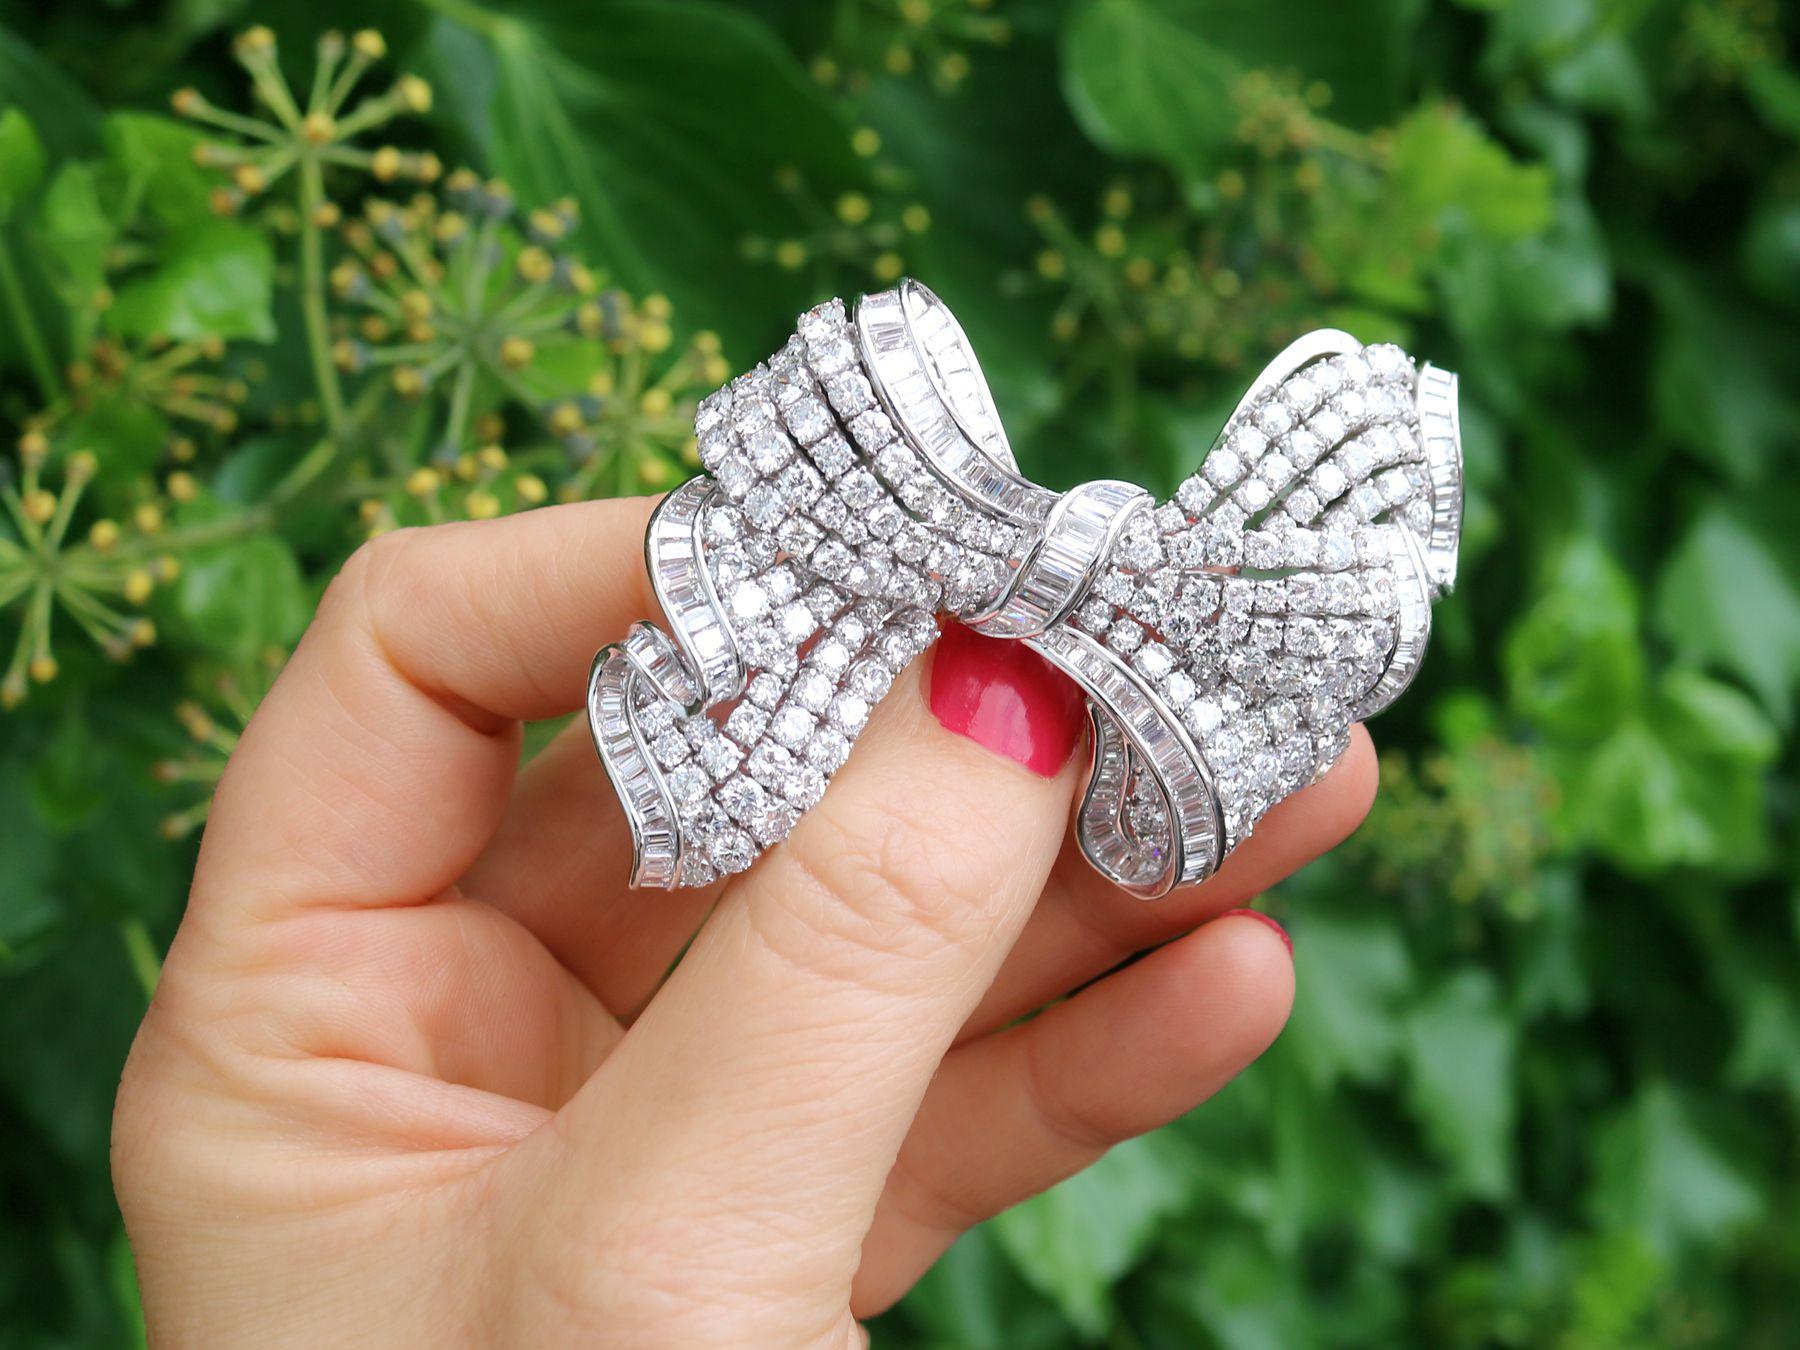 A stunning, fine and impressive, large vintage 1950s 21.04 carat diamond and platinum brooch in the form of a bow; part of our diverse vintage jewelry and estate jewelry collections

This stunning, fine and impressive vintage brooch has been crafted